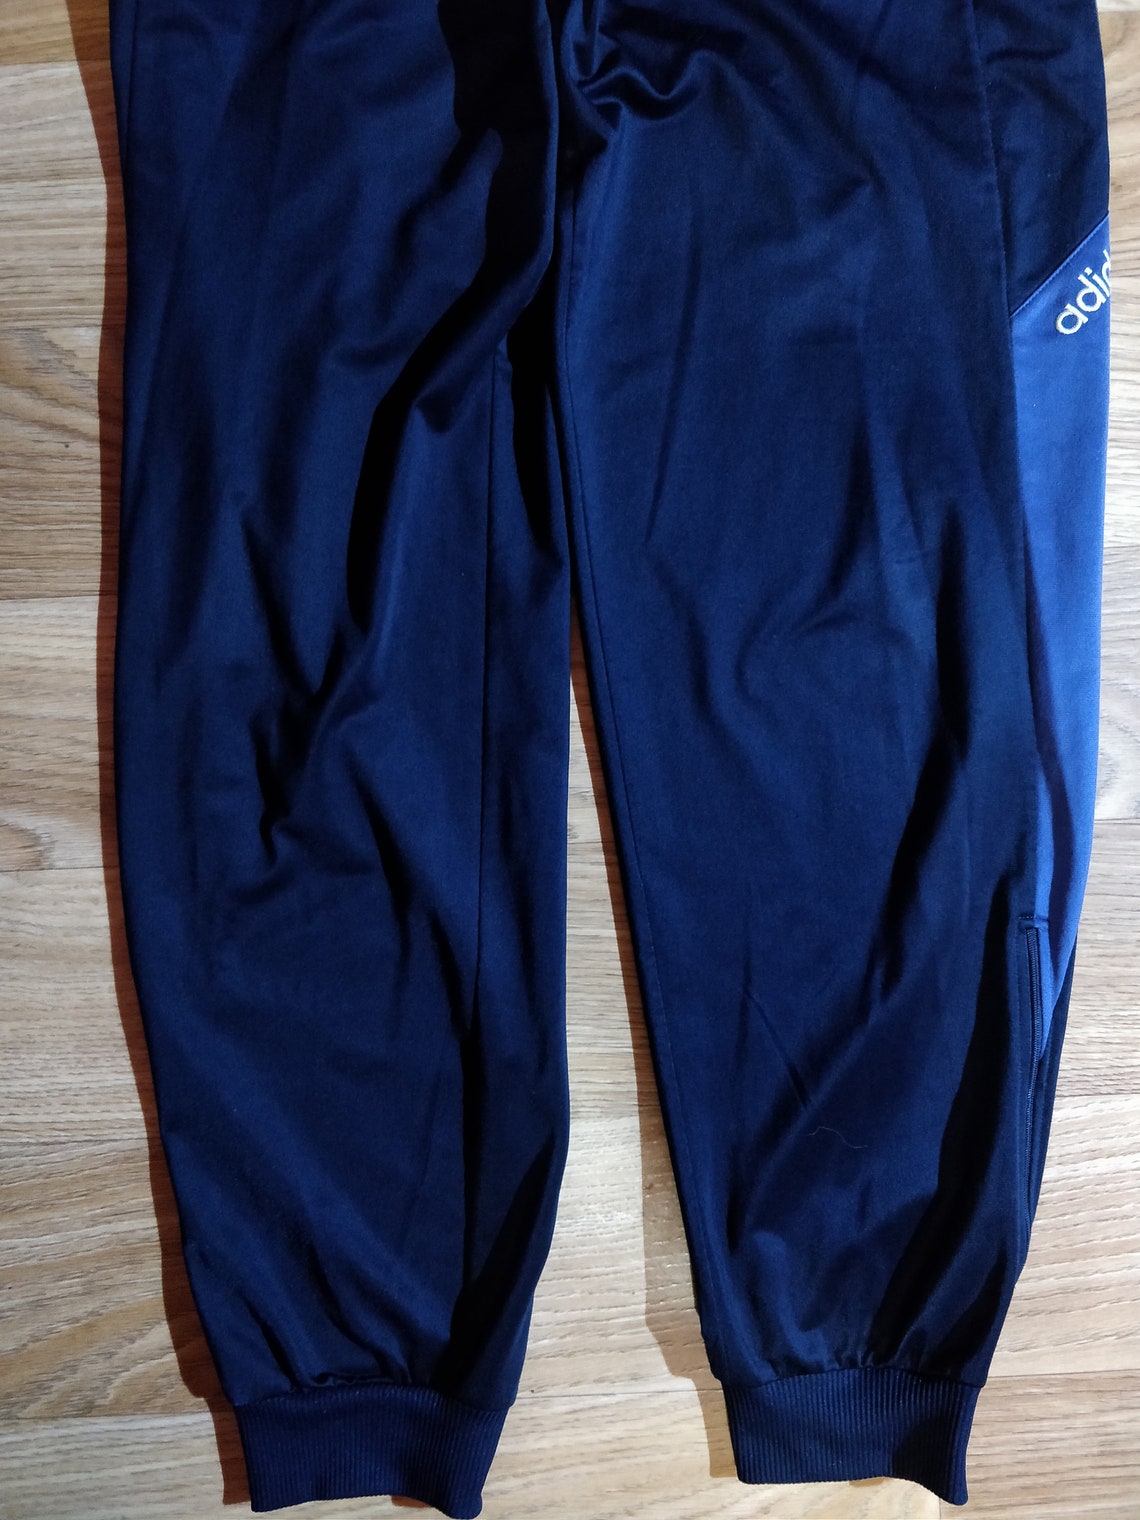 Adidas 90's Vintage Mens Track Pants Trousers Navy Blue | Etsy